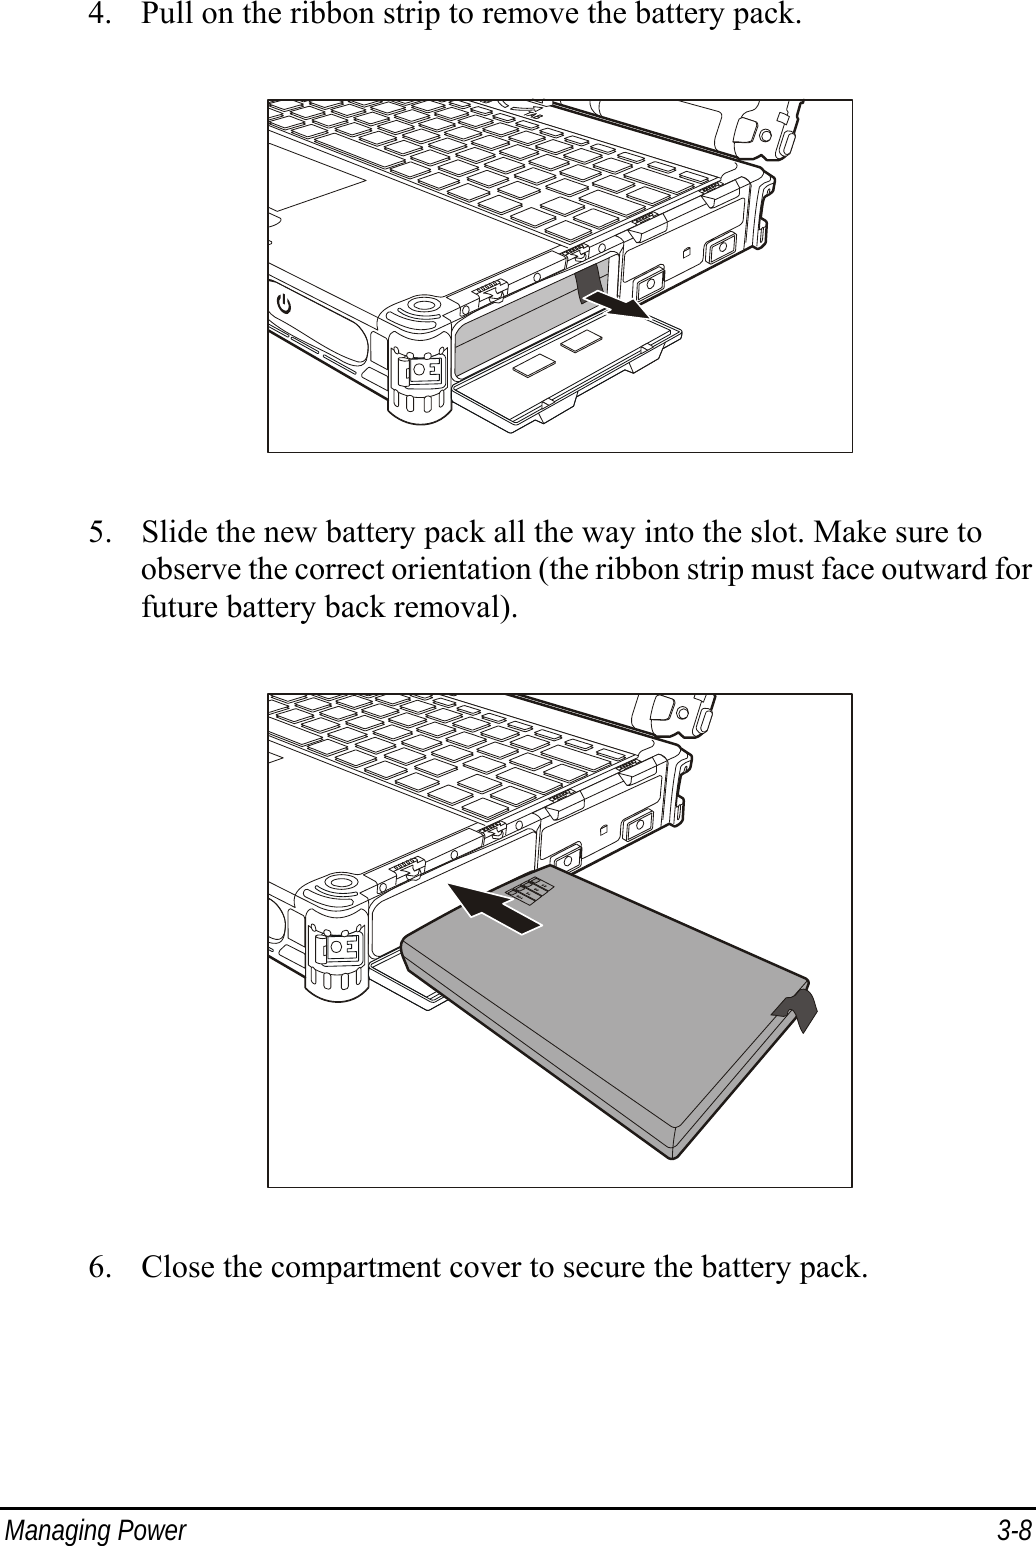  Managing Power  3-8 4. Pull on the ribbon strip to remove the battery pack.  5. Slide the new battery pack all the way into the slot. Make sure to observe the correct orientation (the ribbon strip must face outward for future battery back removal).  6. Close the compartment cover to secure the battery pack.  